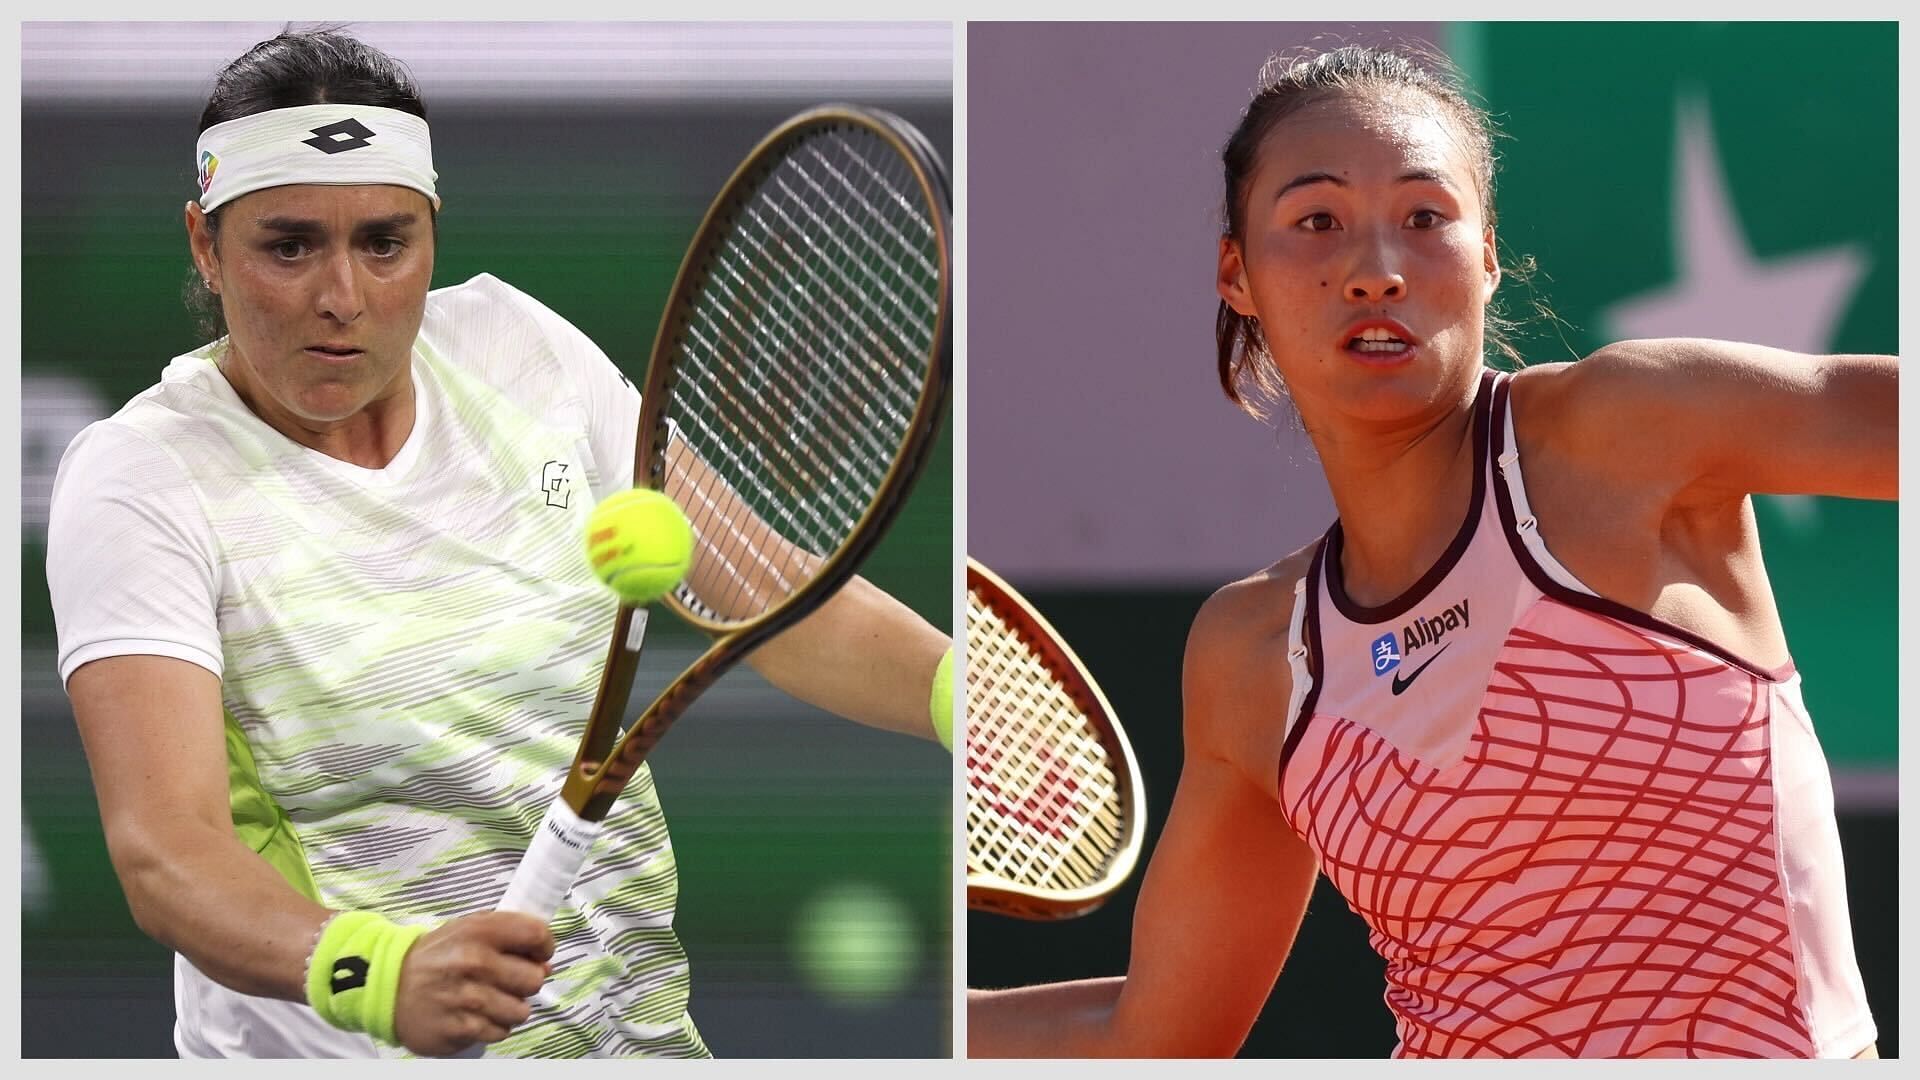 Ons Jabeur vs Qinwen Zheng is one of the fourth-round matches at the 2023 US Open.